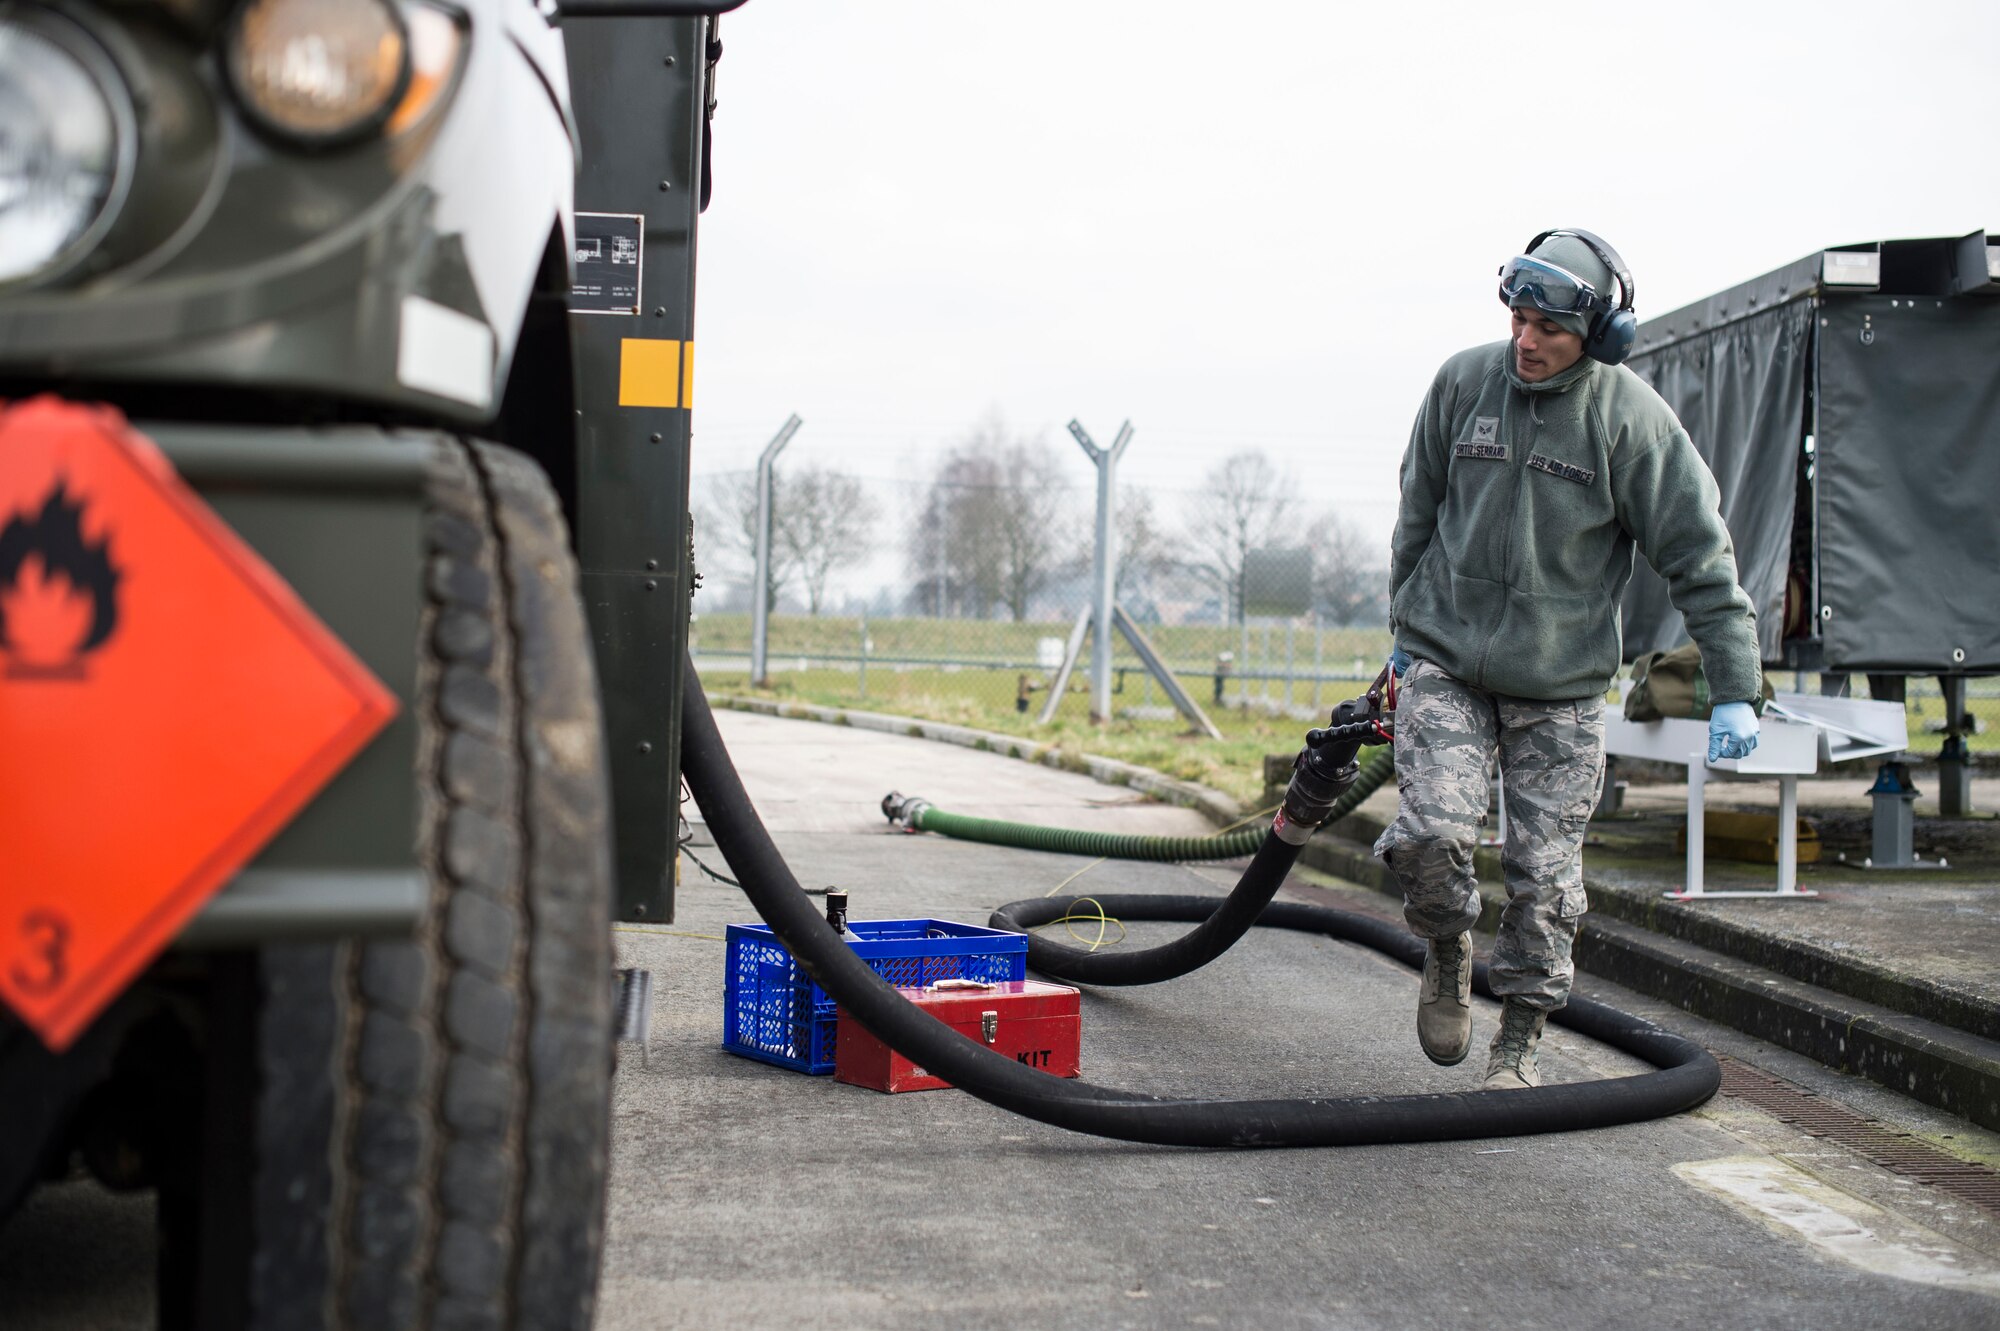 Senior Airman Julian Ortiz-Serrano, 424th Air Base Squadron fuels management technician, stows a hose after refilling a fuel truck at Chièvres Air Base, Belgium, Feb. 25, 2016. Romero is one of 70 Airmen assigned to the 424th ABS. (U.S. Air Force photo/Staff Sgt. Sara Keller)